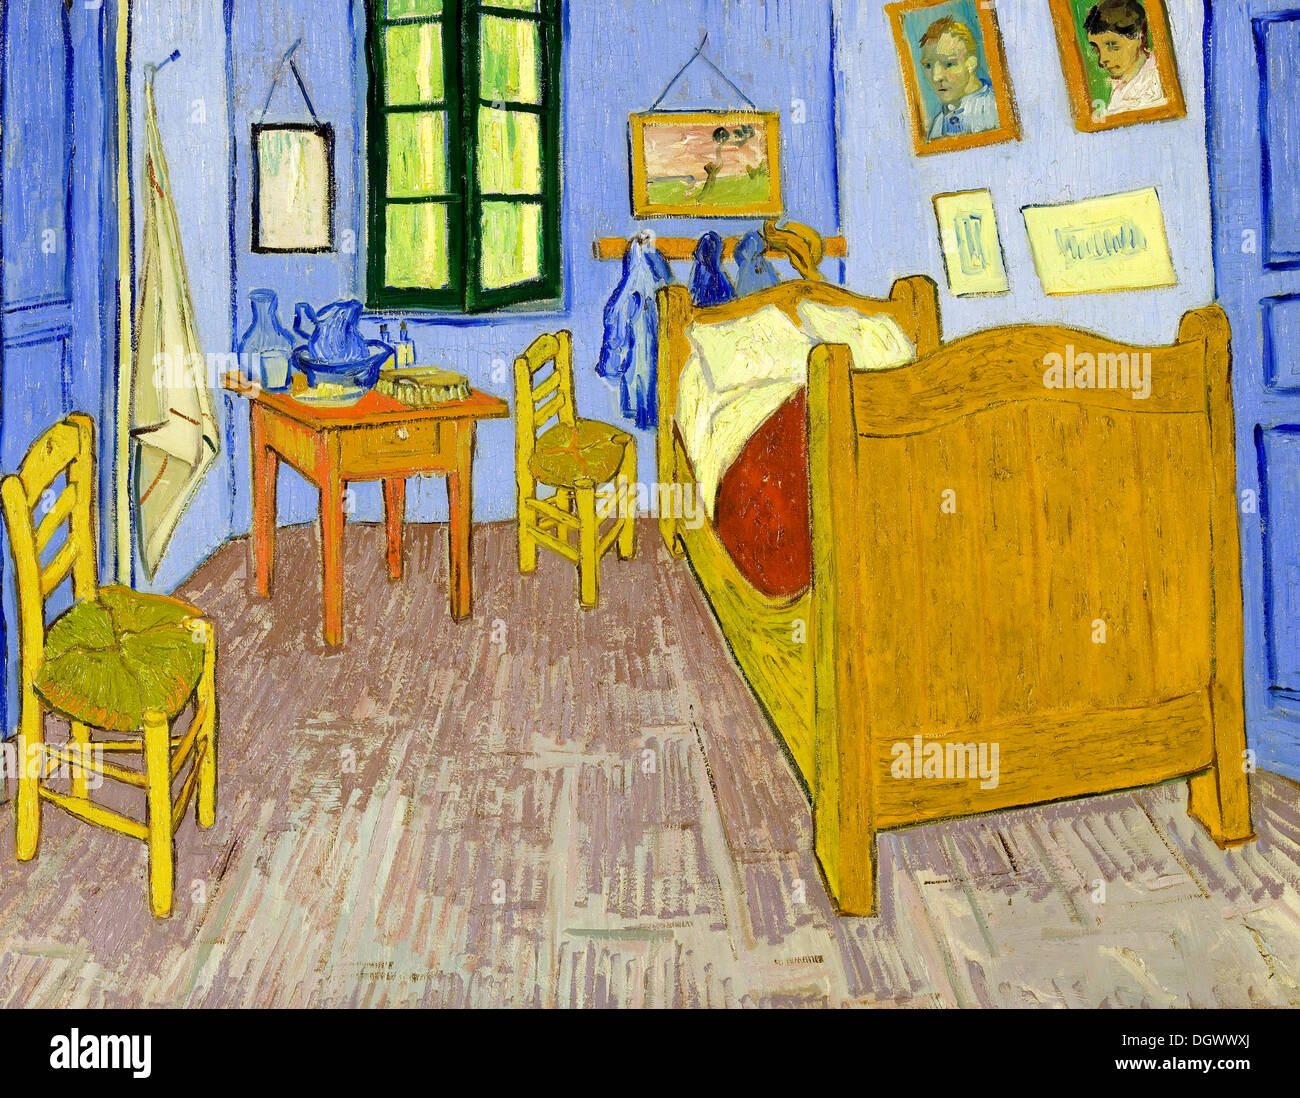 Vincent Van Gogh Bedroom In Arles Home Design Ideas,Apartment Therapy Small Spaces Contest